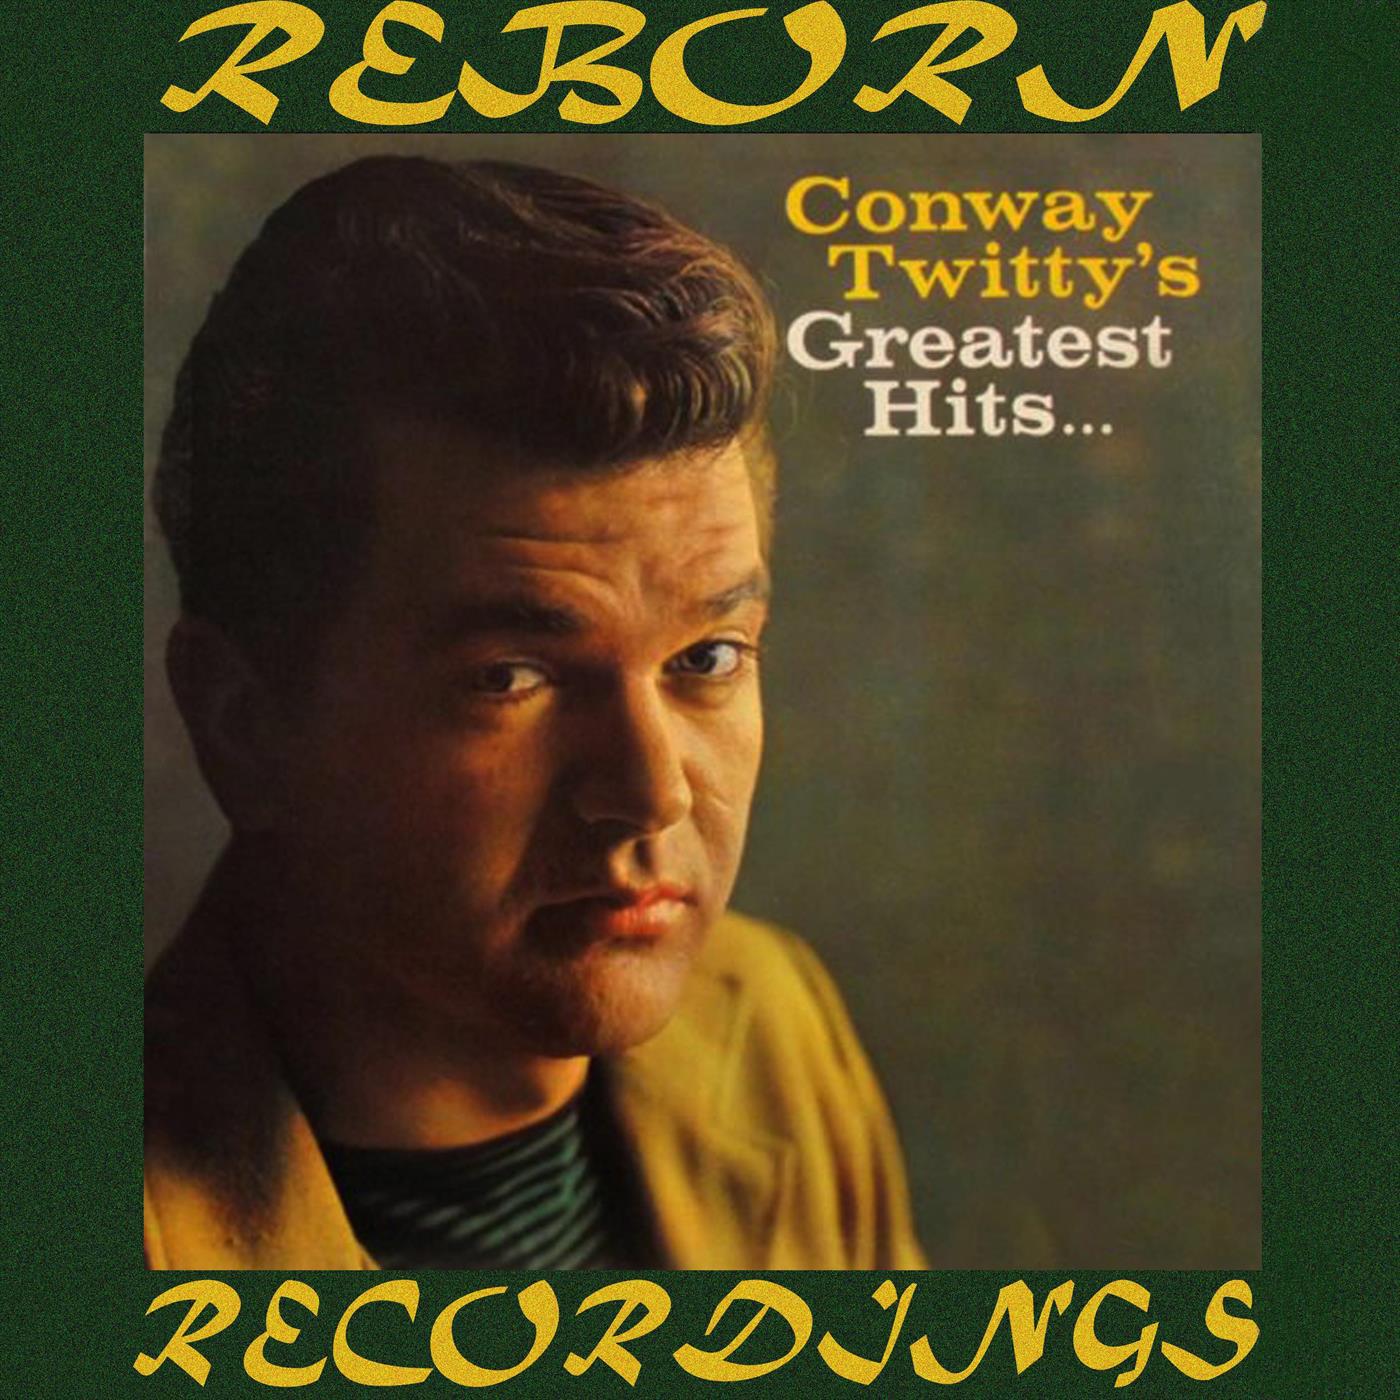 Conway Twitty's Greatest Hits, The Complete Recordings (HD Remastered)